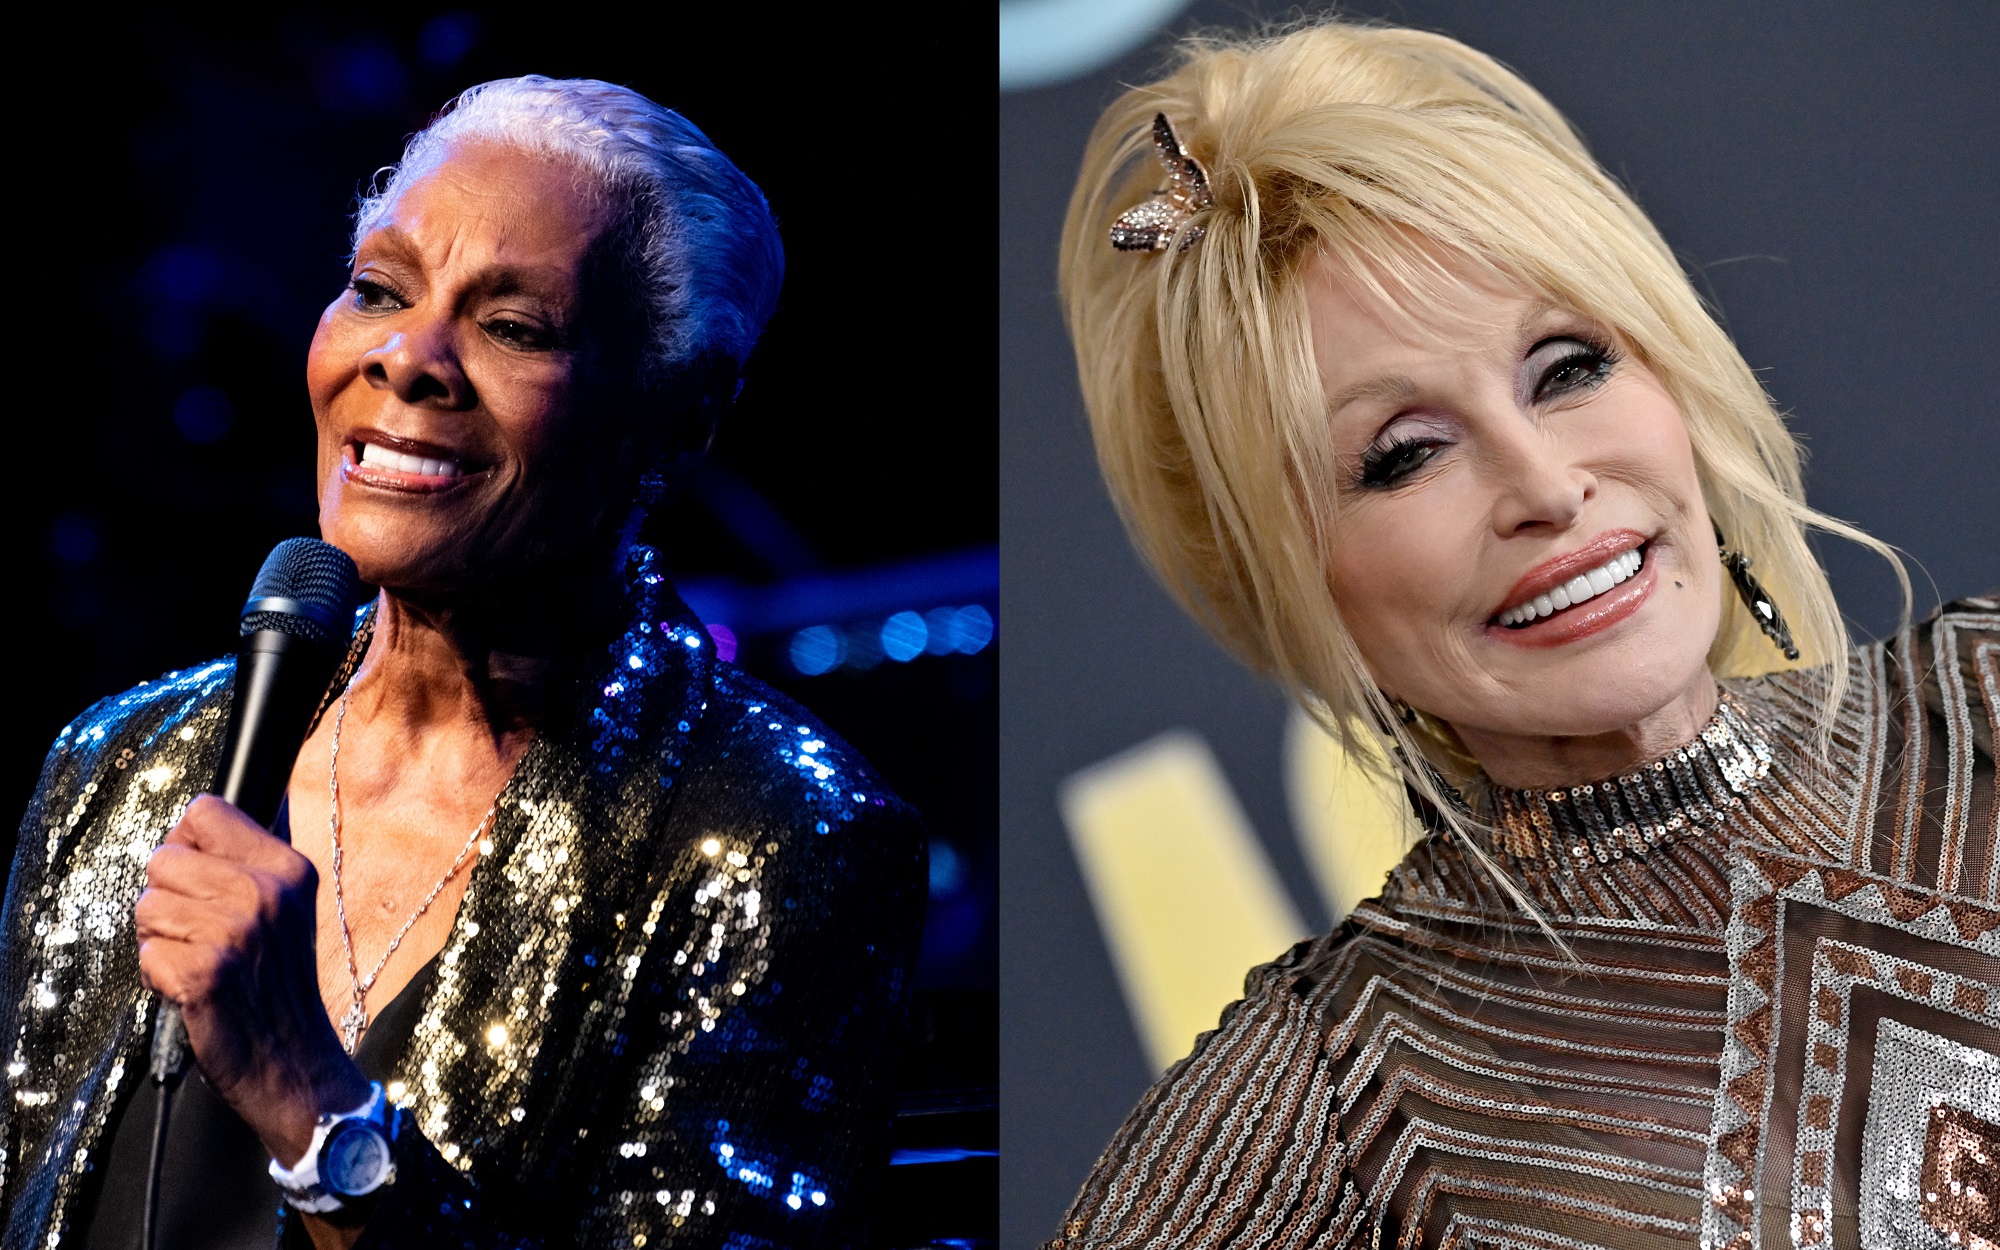 A joined photo of Dionne Warwick and Dolly Parton